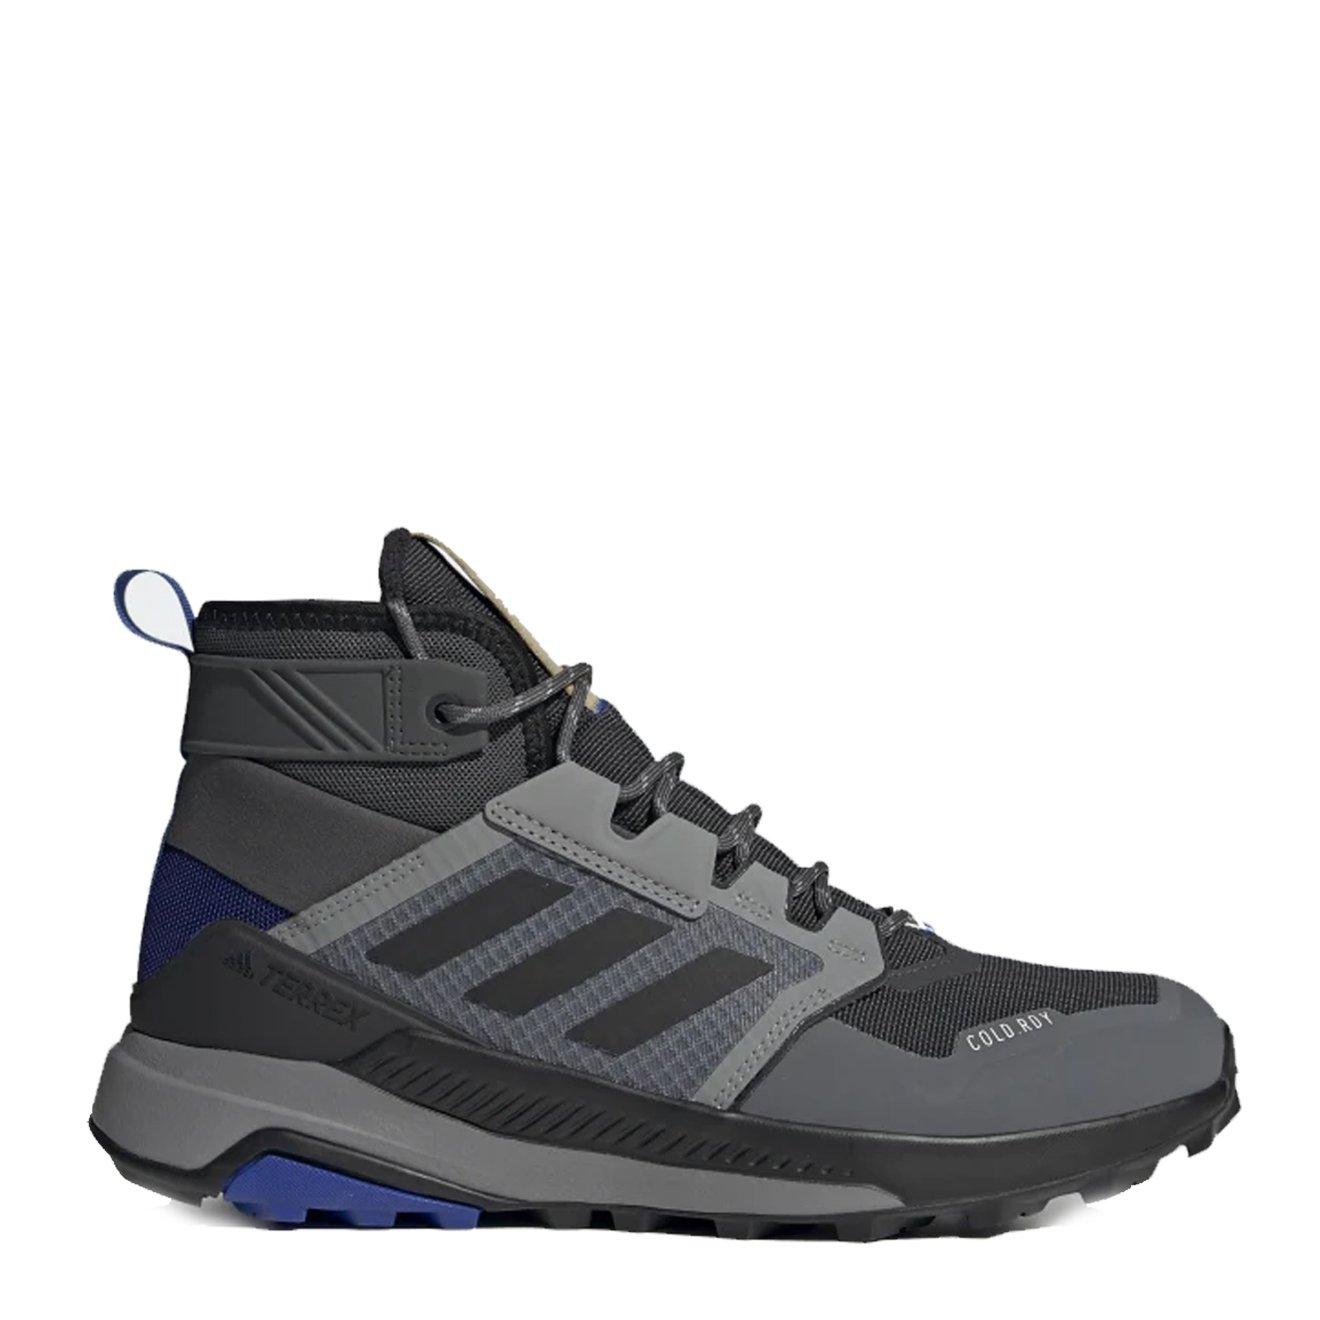 adidas Lace Terrex Trailmaker Mid Cold.rdy Hiking Shoes Six in 